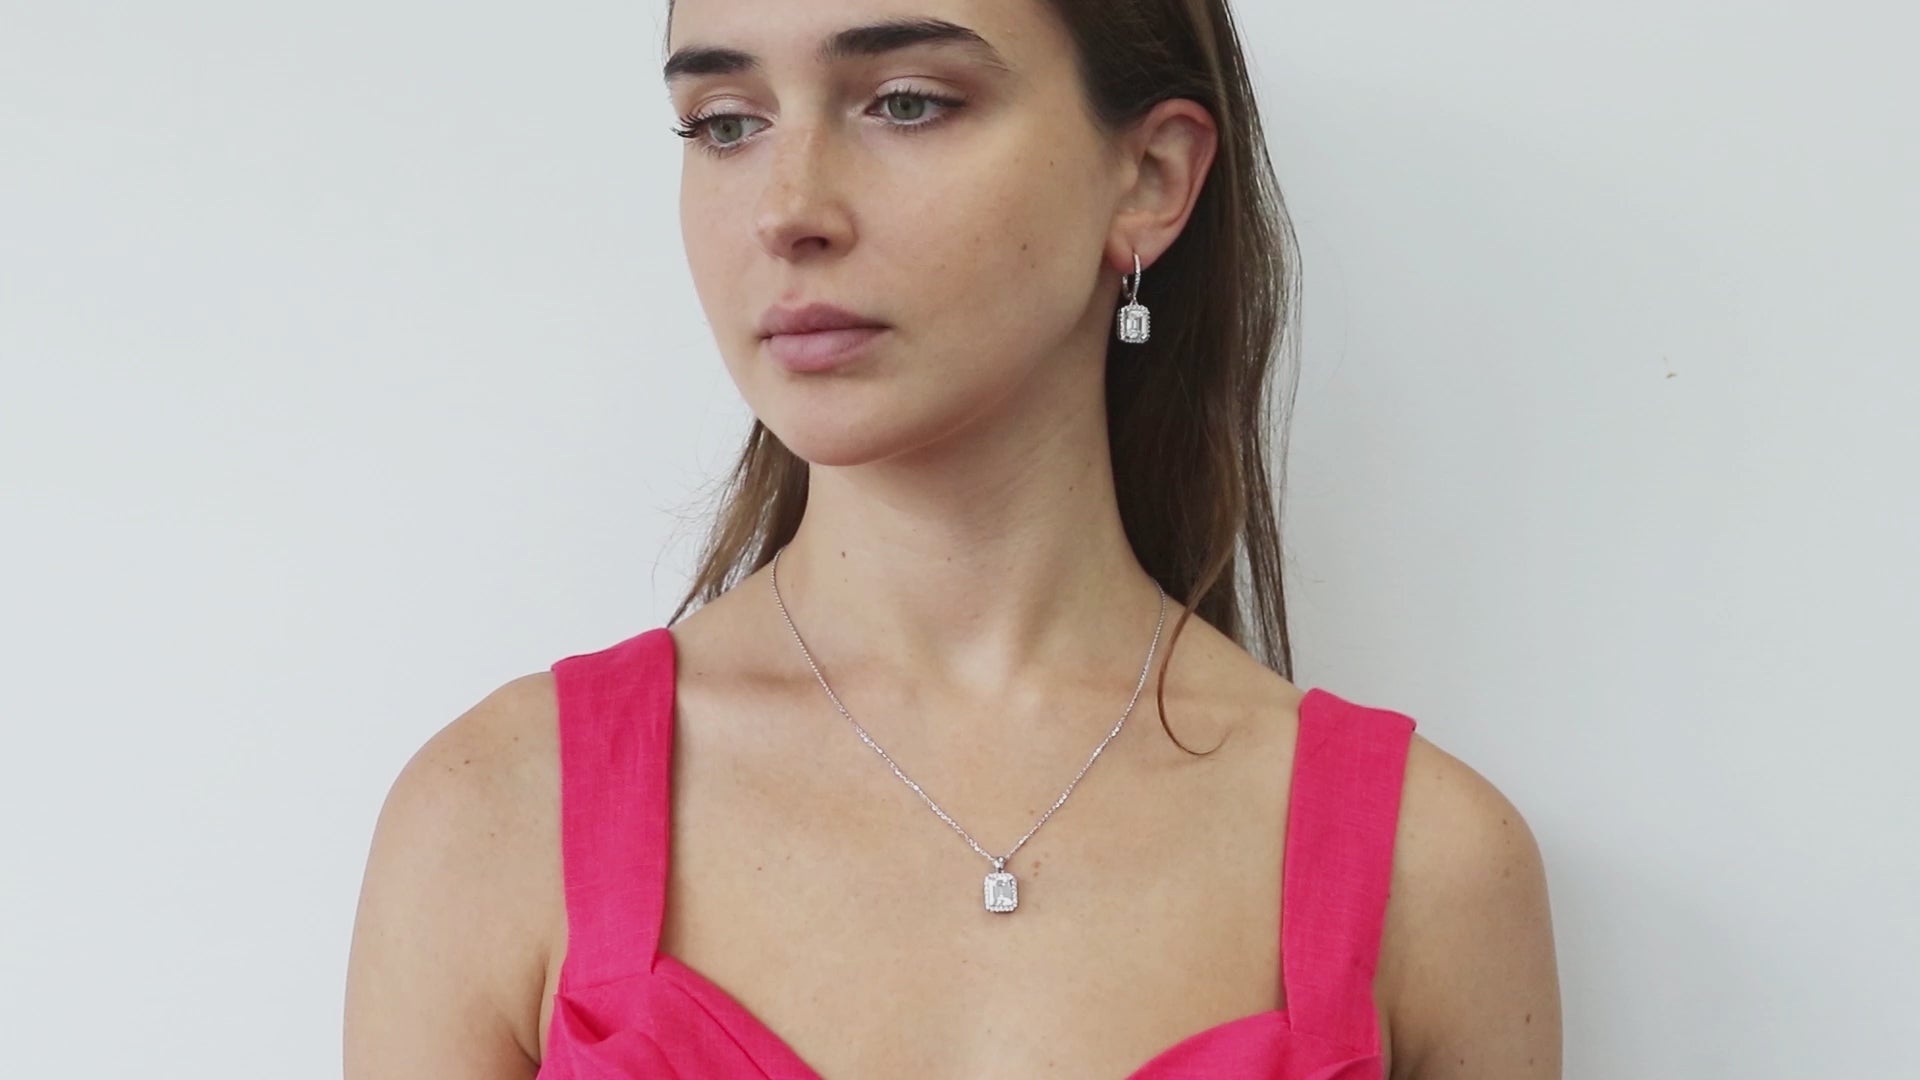 Video Contains Halo Emerald Cut CZ Necklace and Earrings Set in Sterling Silver. Style Number VS490-01